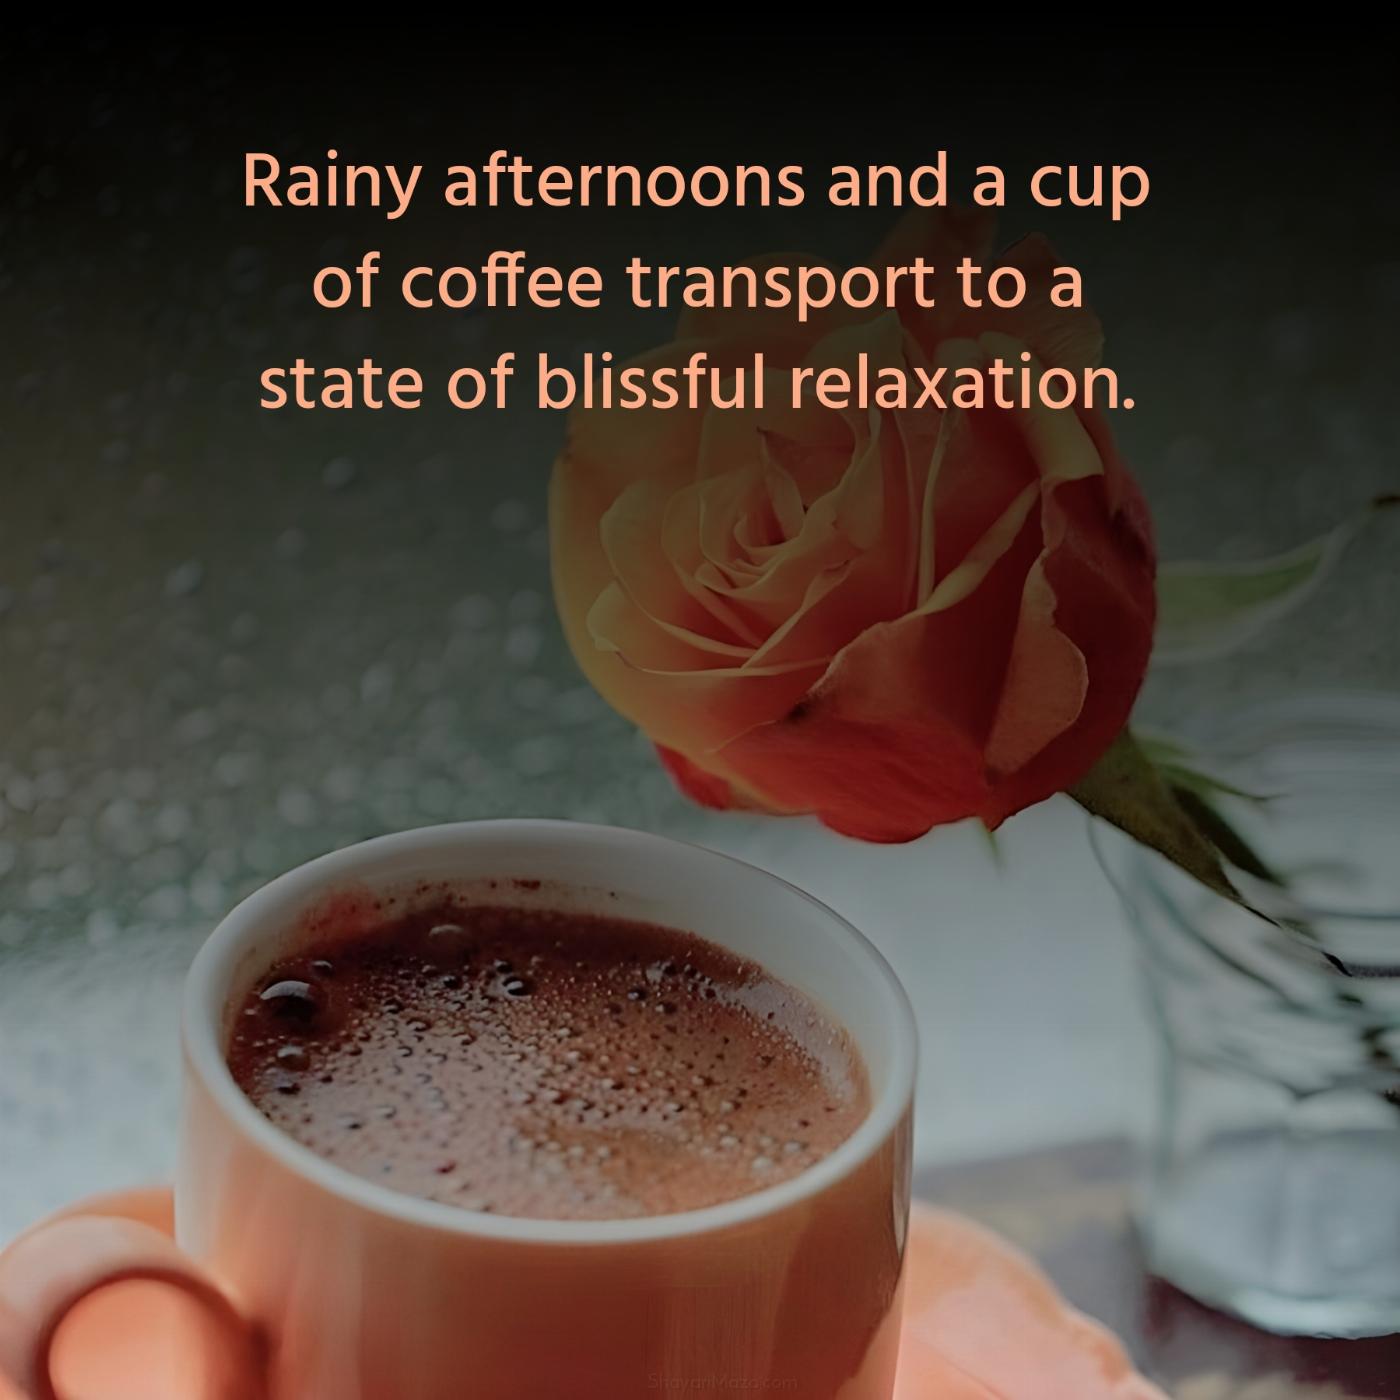 Rainy afternoons and a cup of coffee transport to a state of blissful relaxation